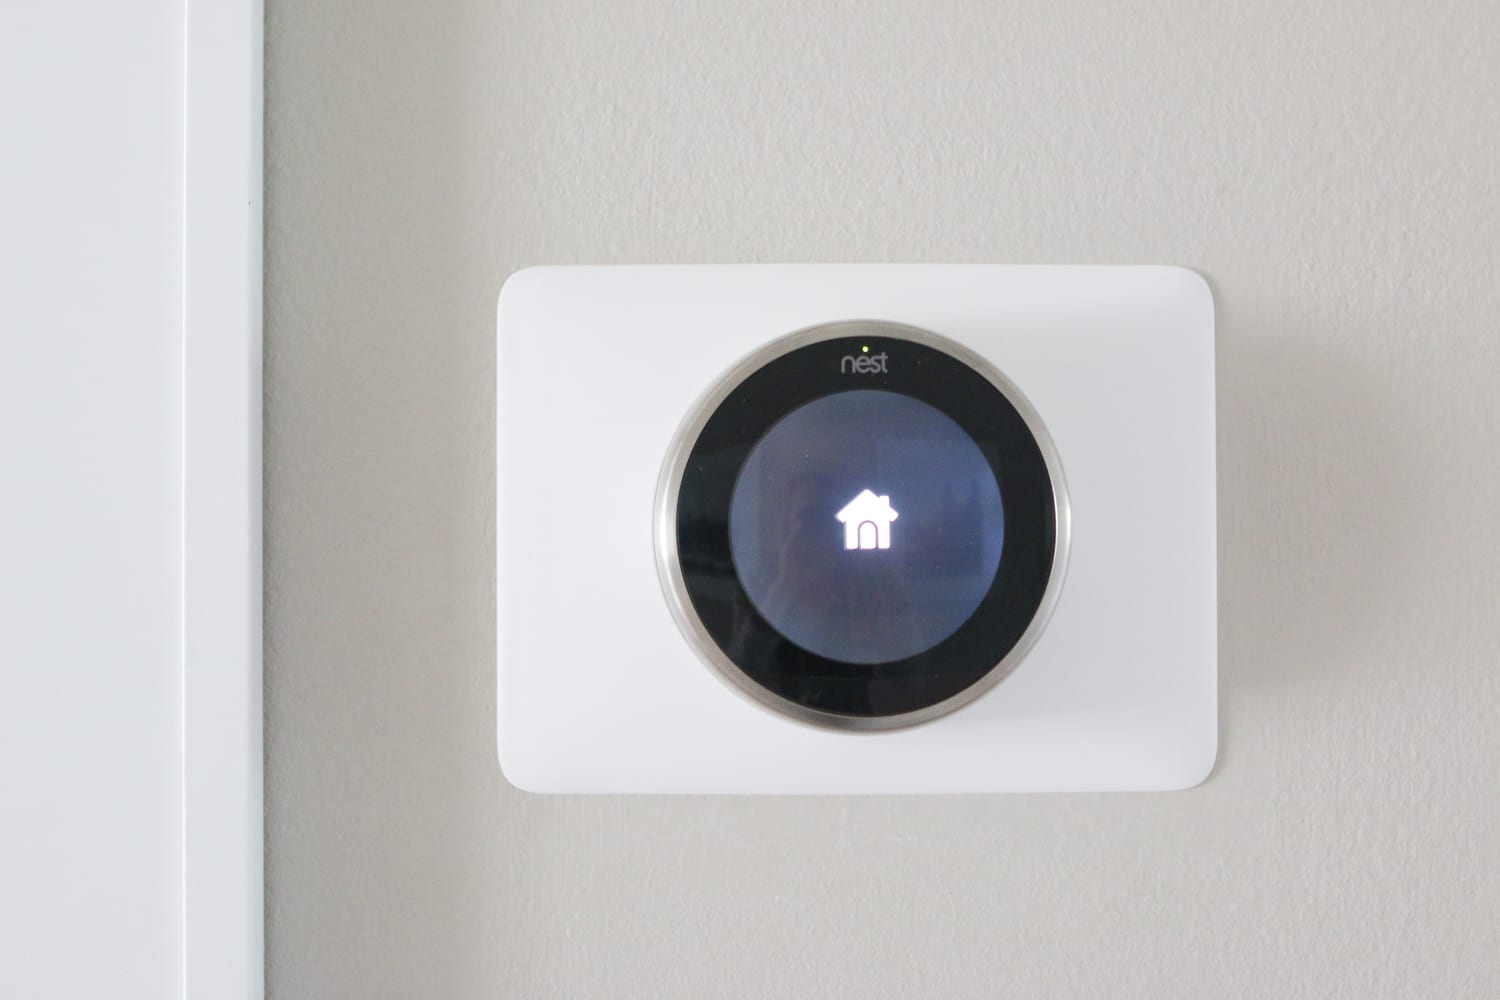 installing a nest thermostat in your house